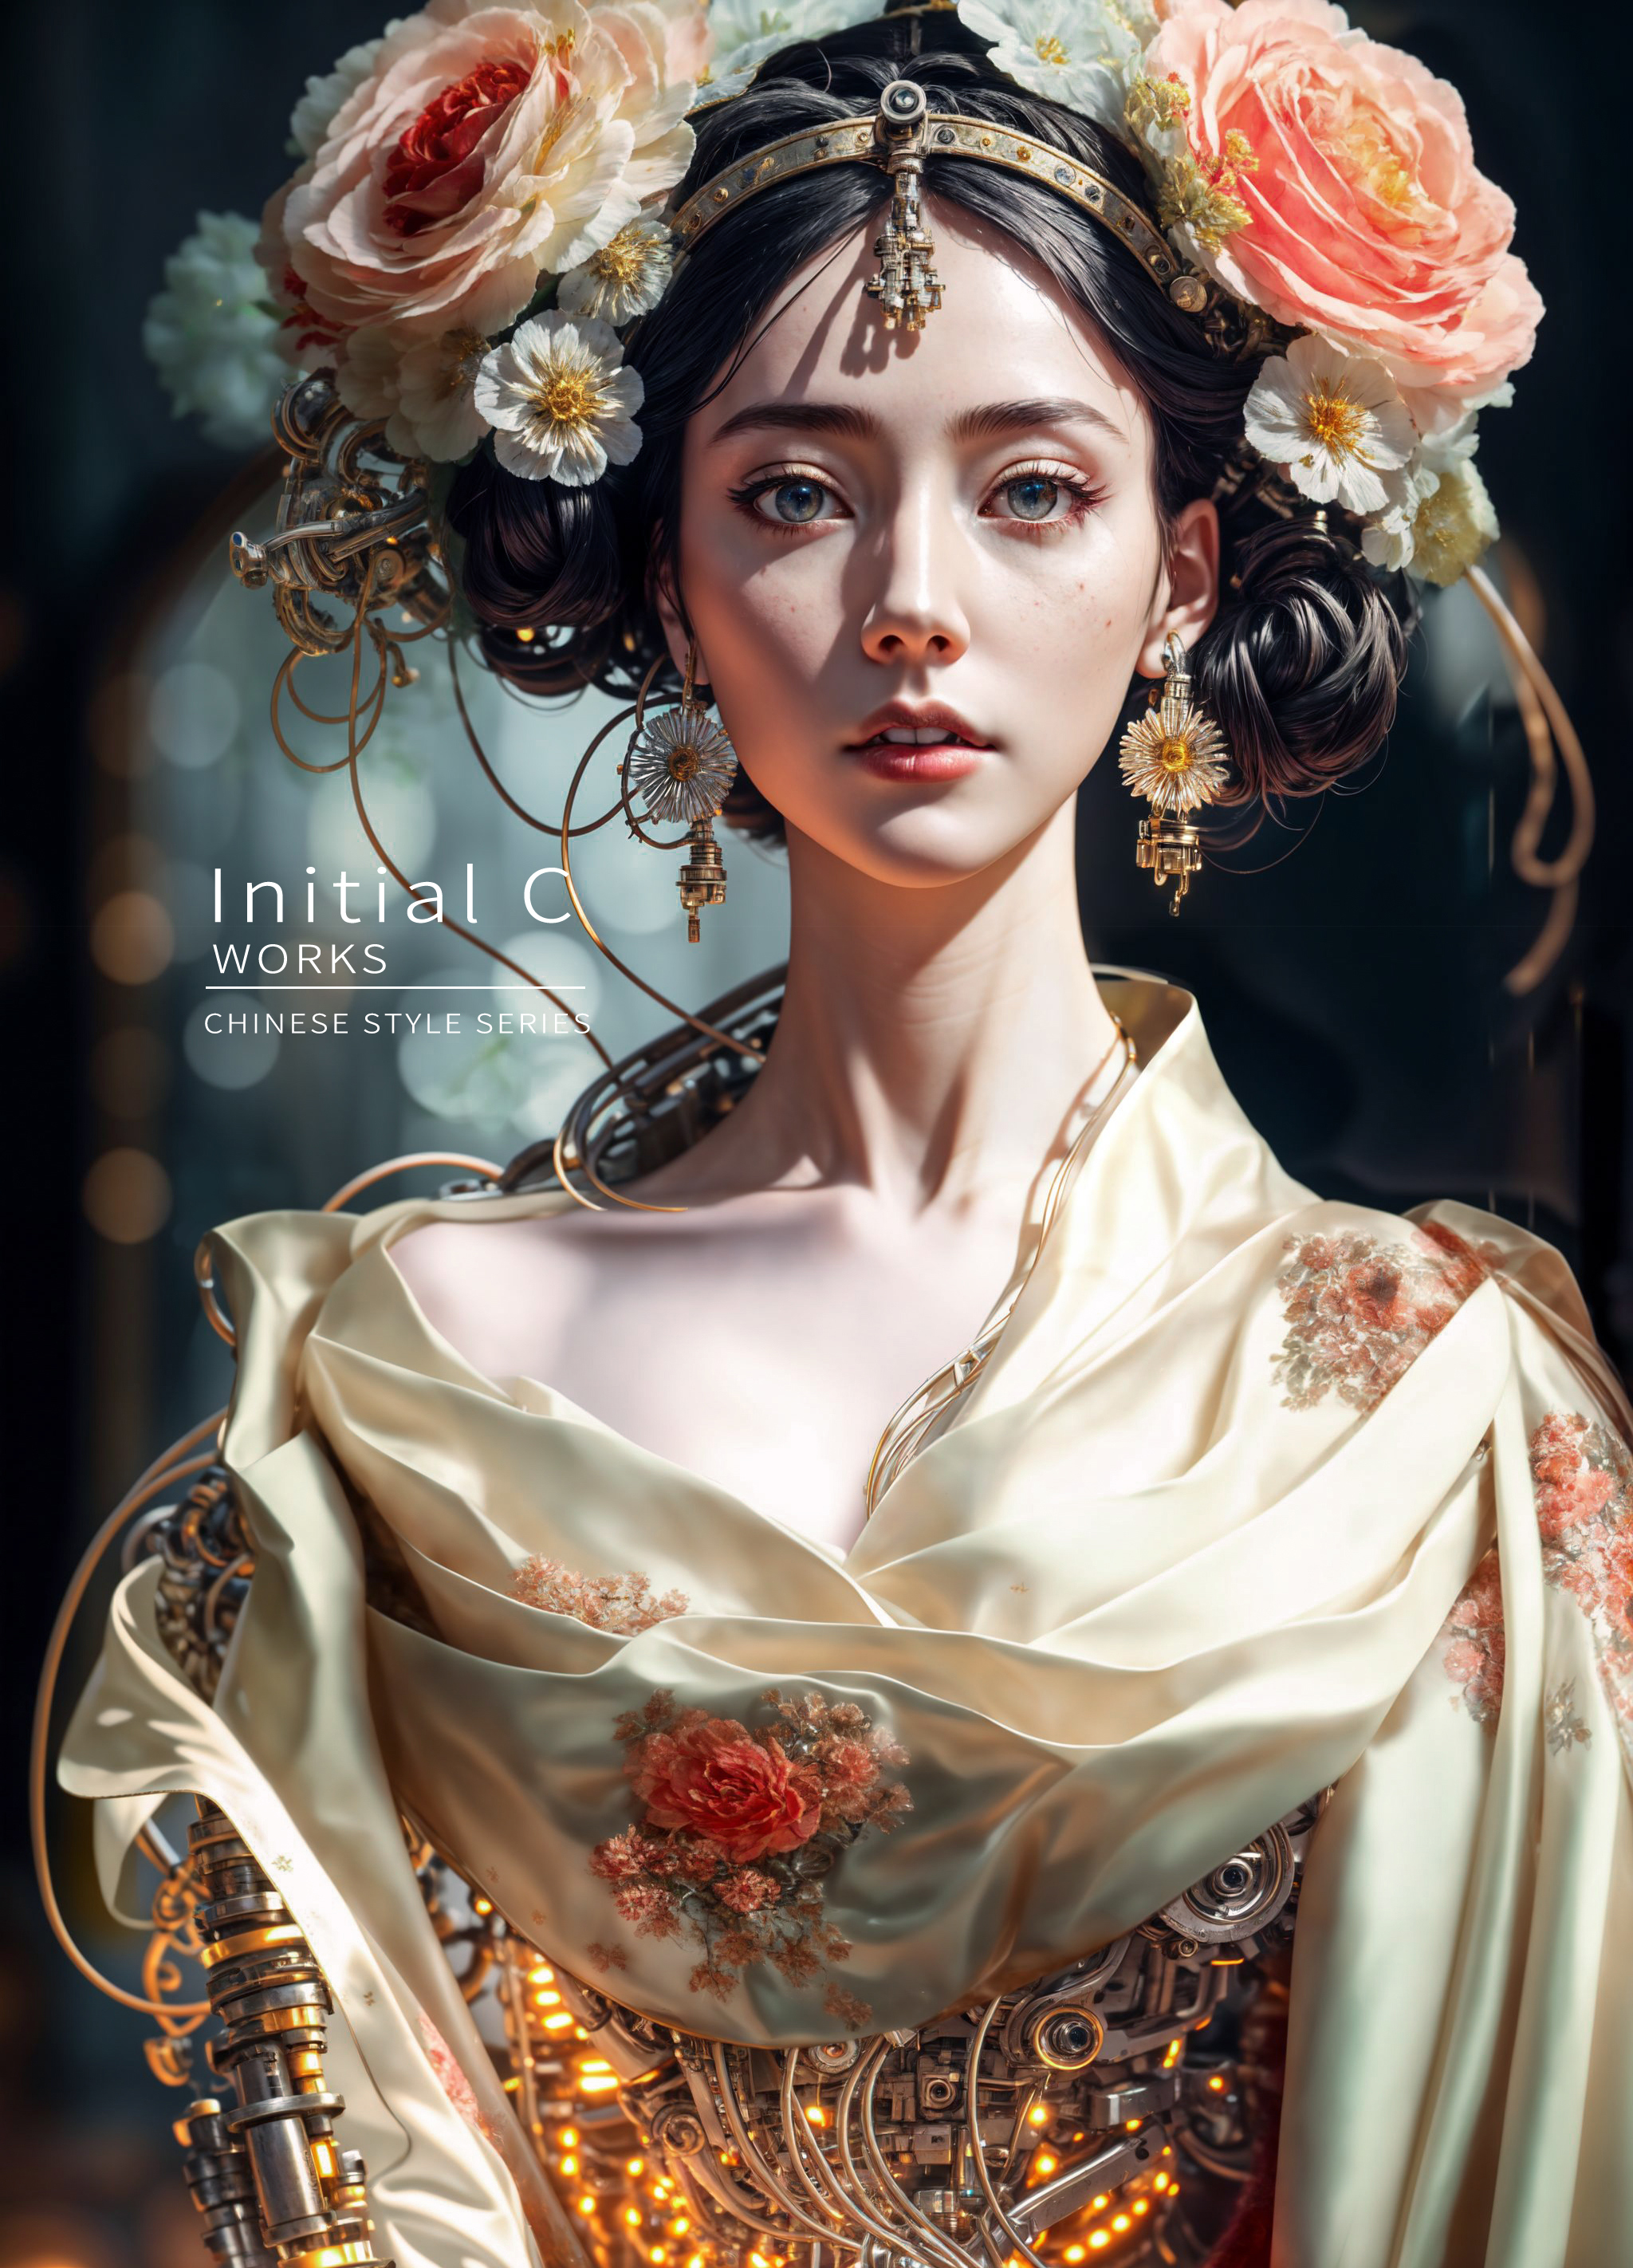 Initial C Works - Chinese Style School - Digital Art of a Woman with Flowers in Her Hair.